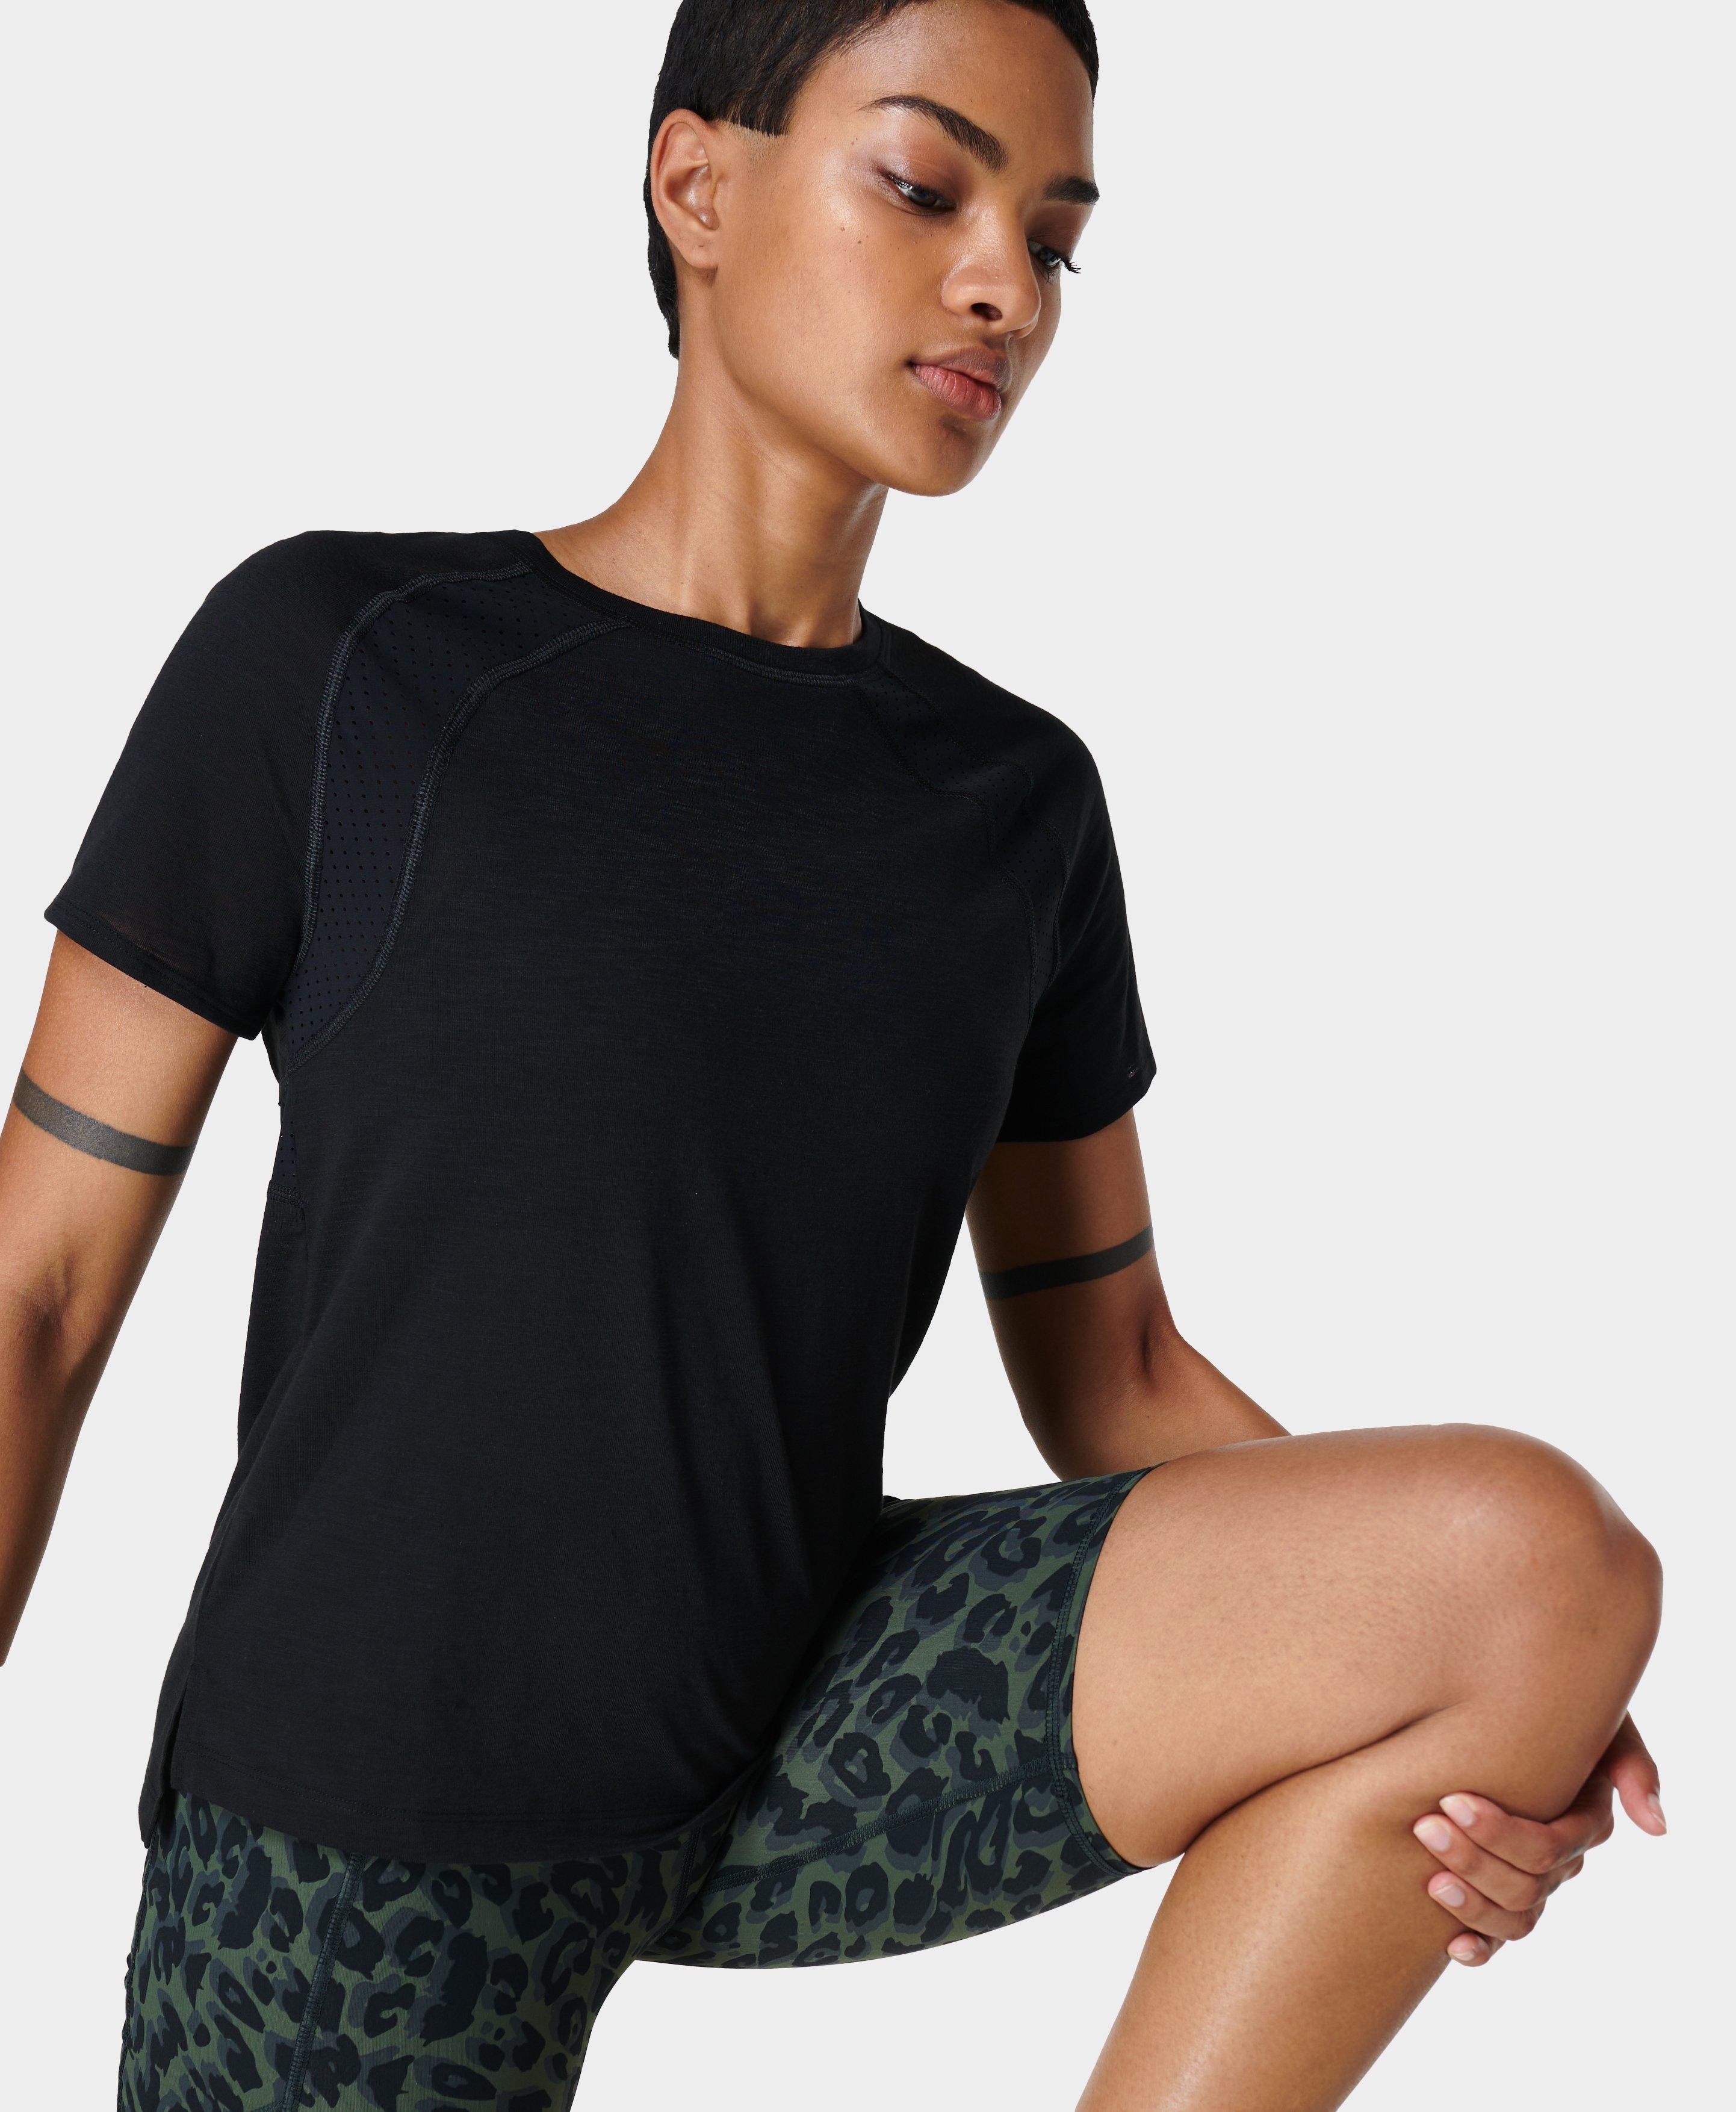 What to shop in the Sweaty Betty sale